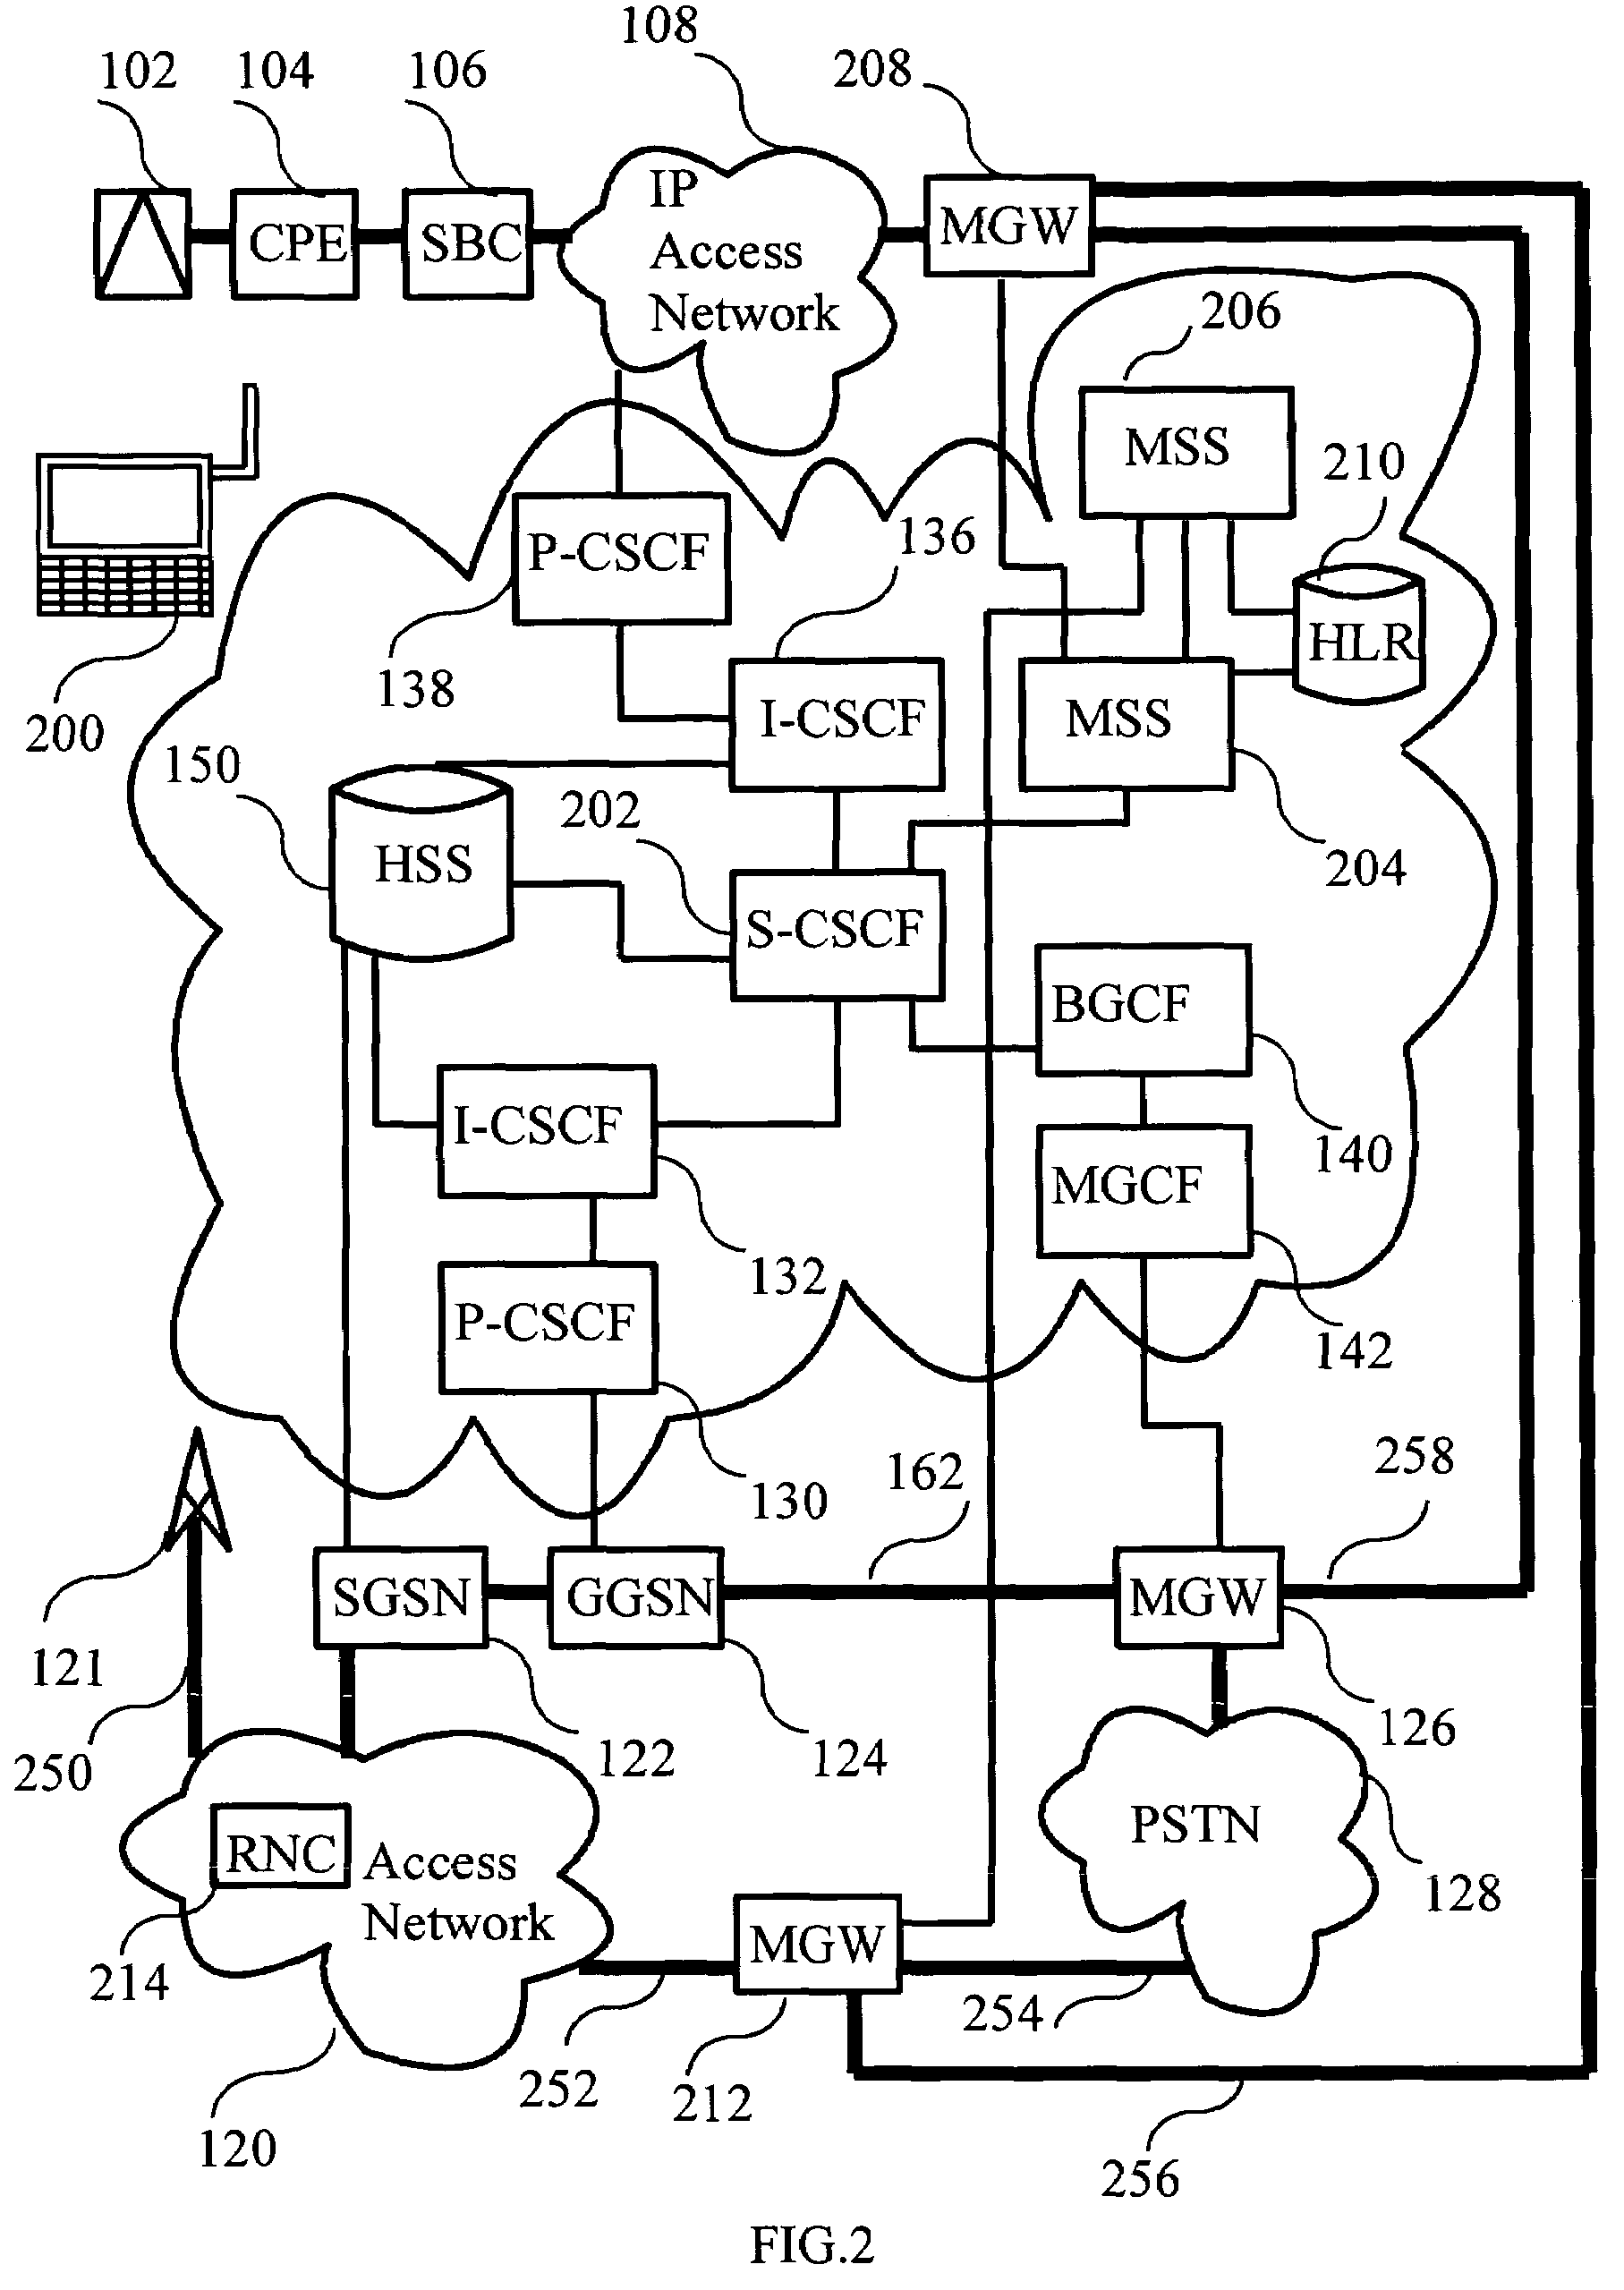 Method for performing inter-system handovers in a mobile communication system